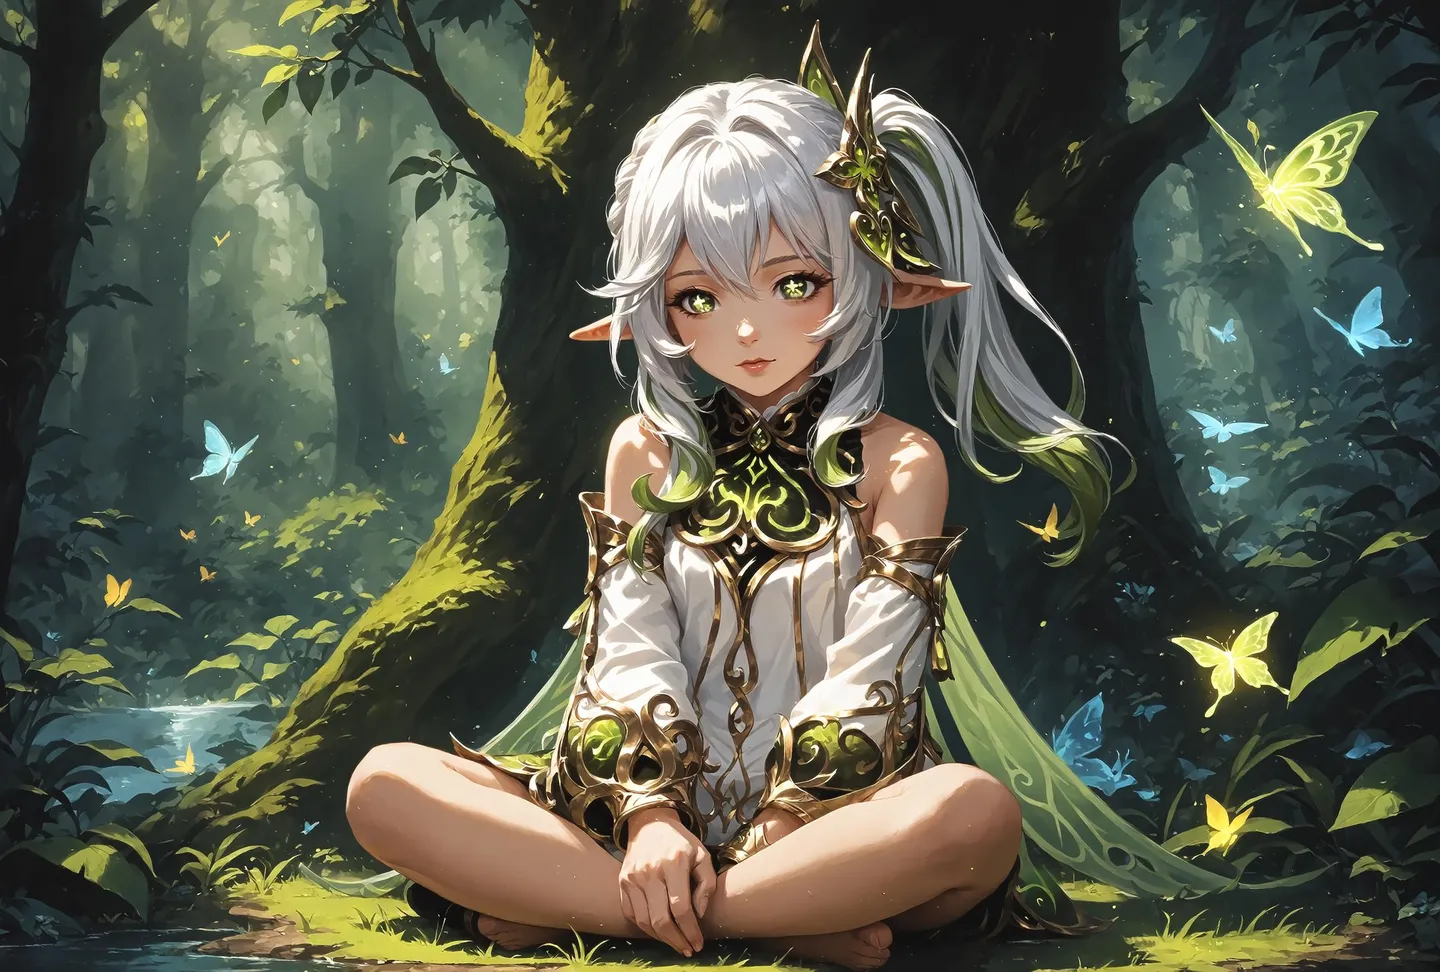 AI-generated image of an elven girl with white hair and green eyes sitting in an enchanted forest, created using Stable Diffusion.